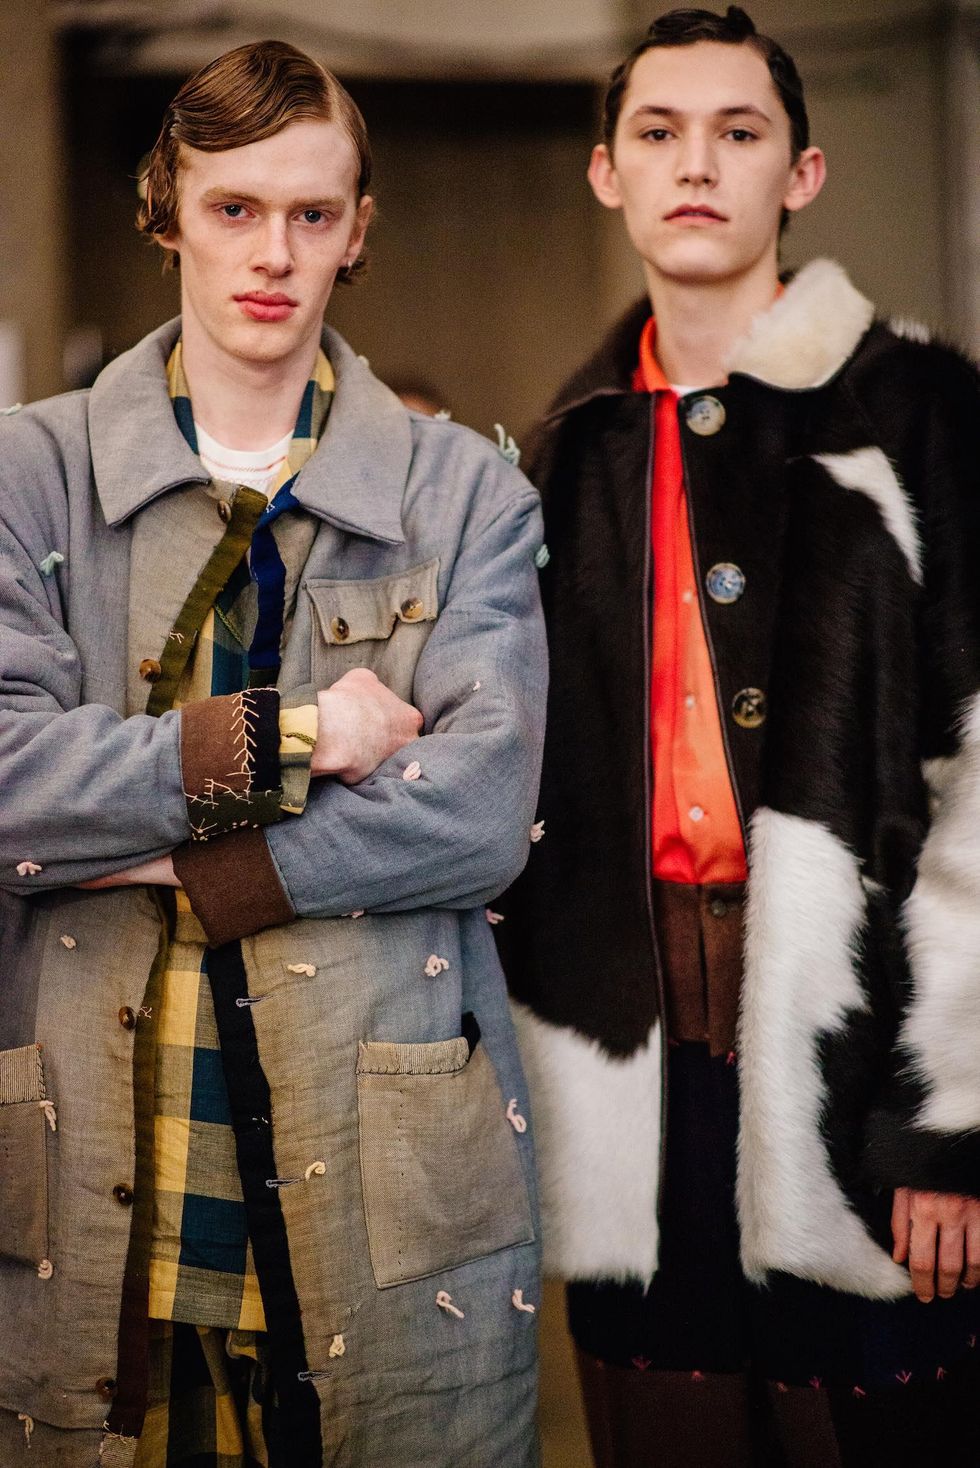 Bode Kicked Off Fashion Week With Quilted, Cozy Dandies